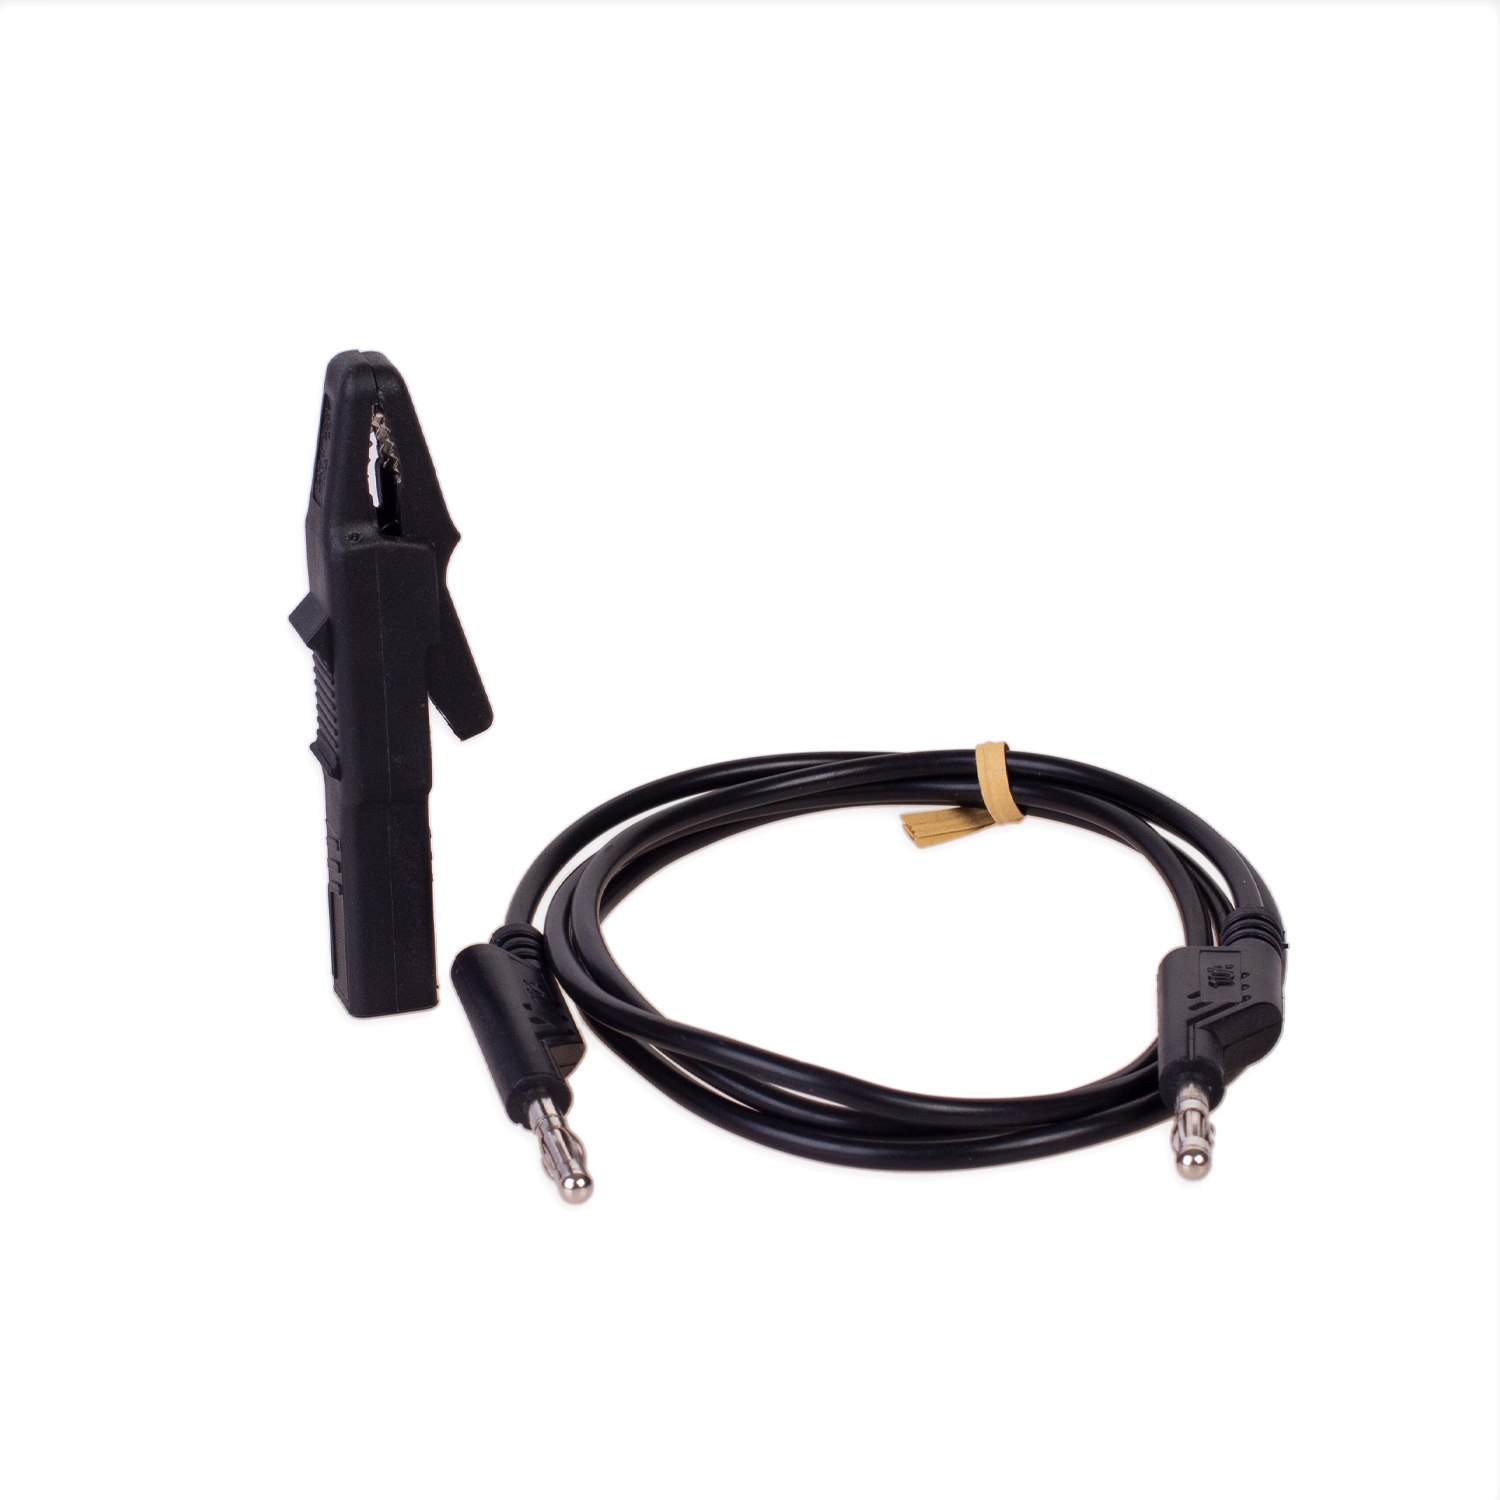 Cable black with clamp for RMgo!/ RM01